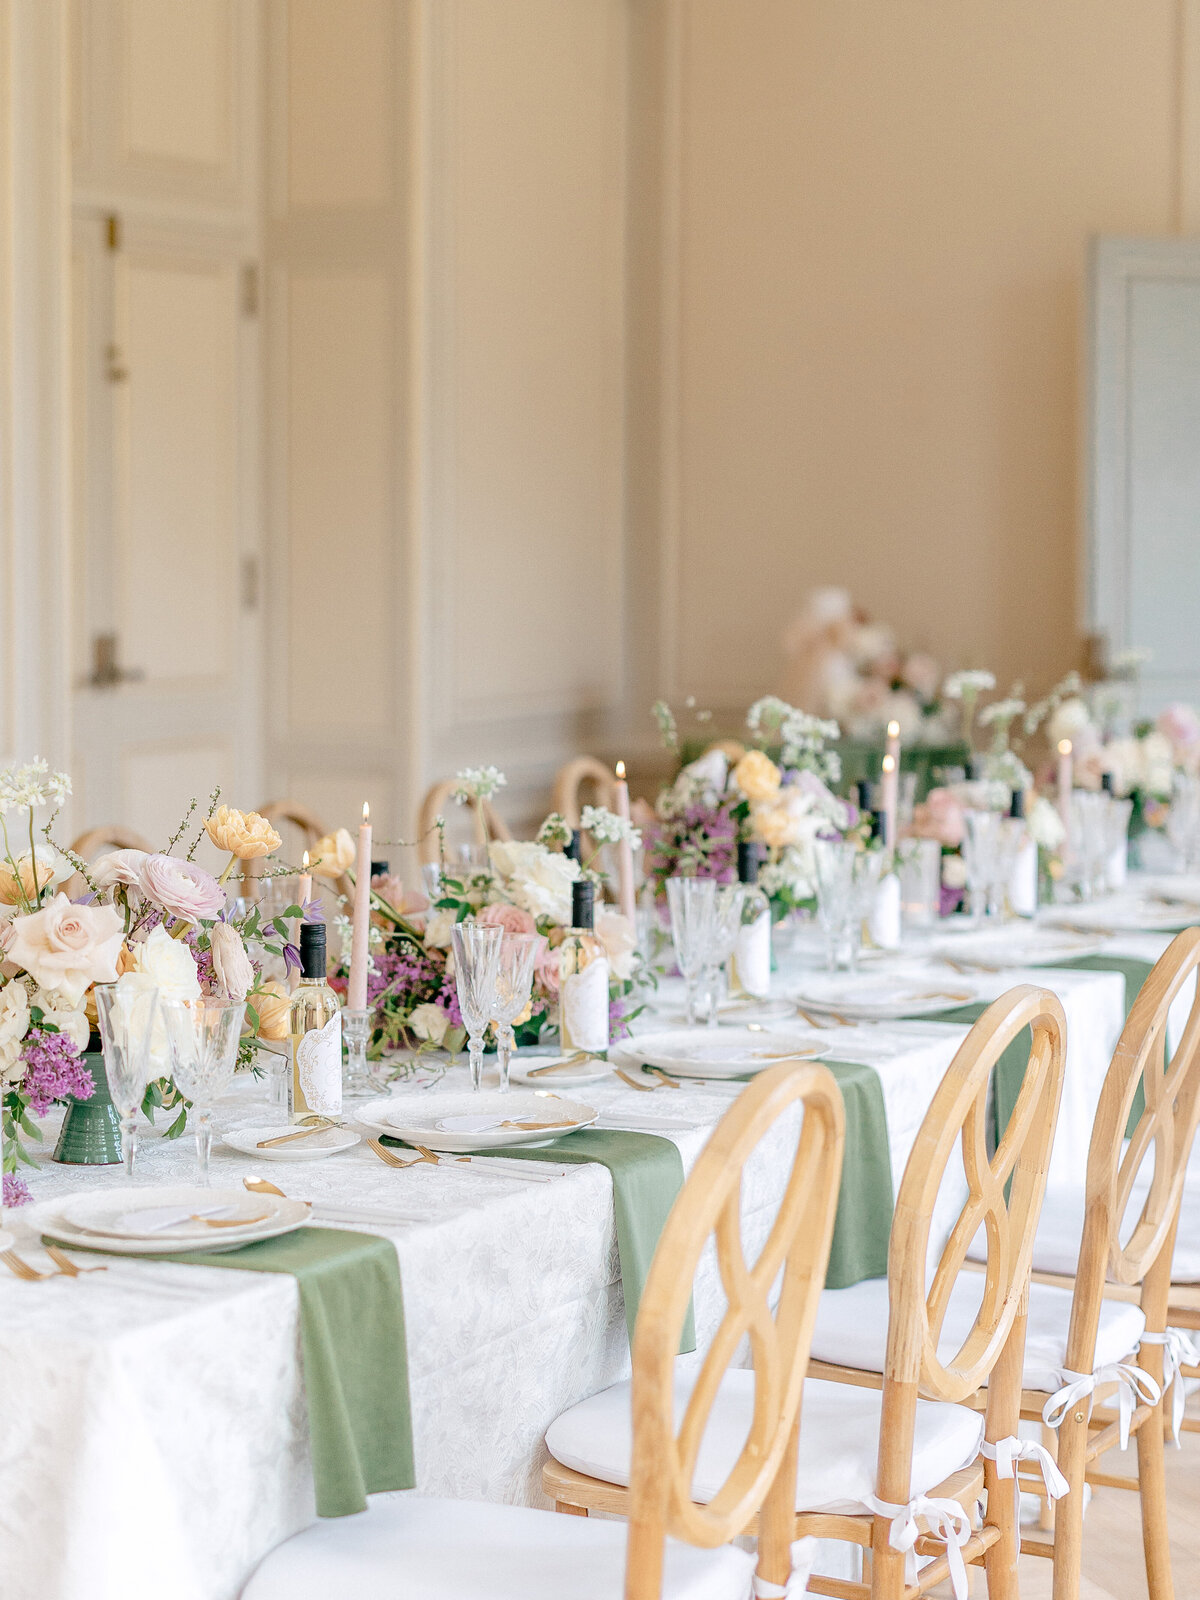 Wedding reception tables with wood chairs, green napkins, candles, and floral centerpieces